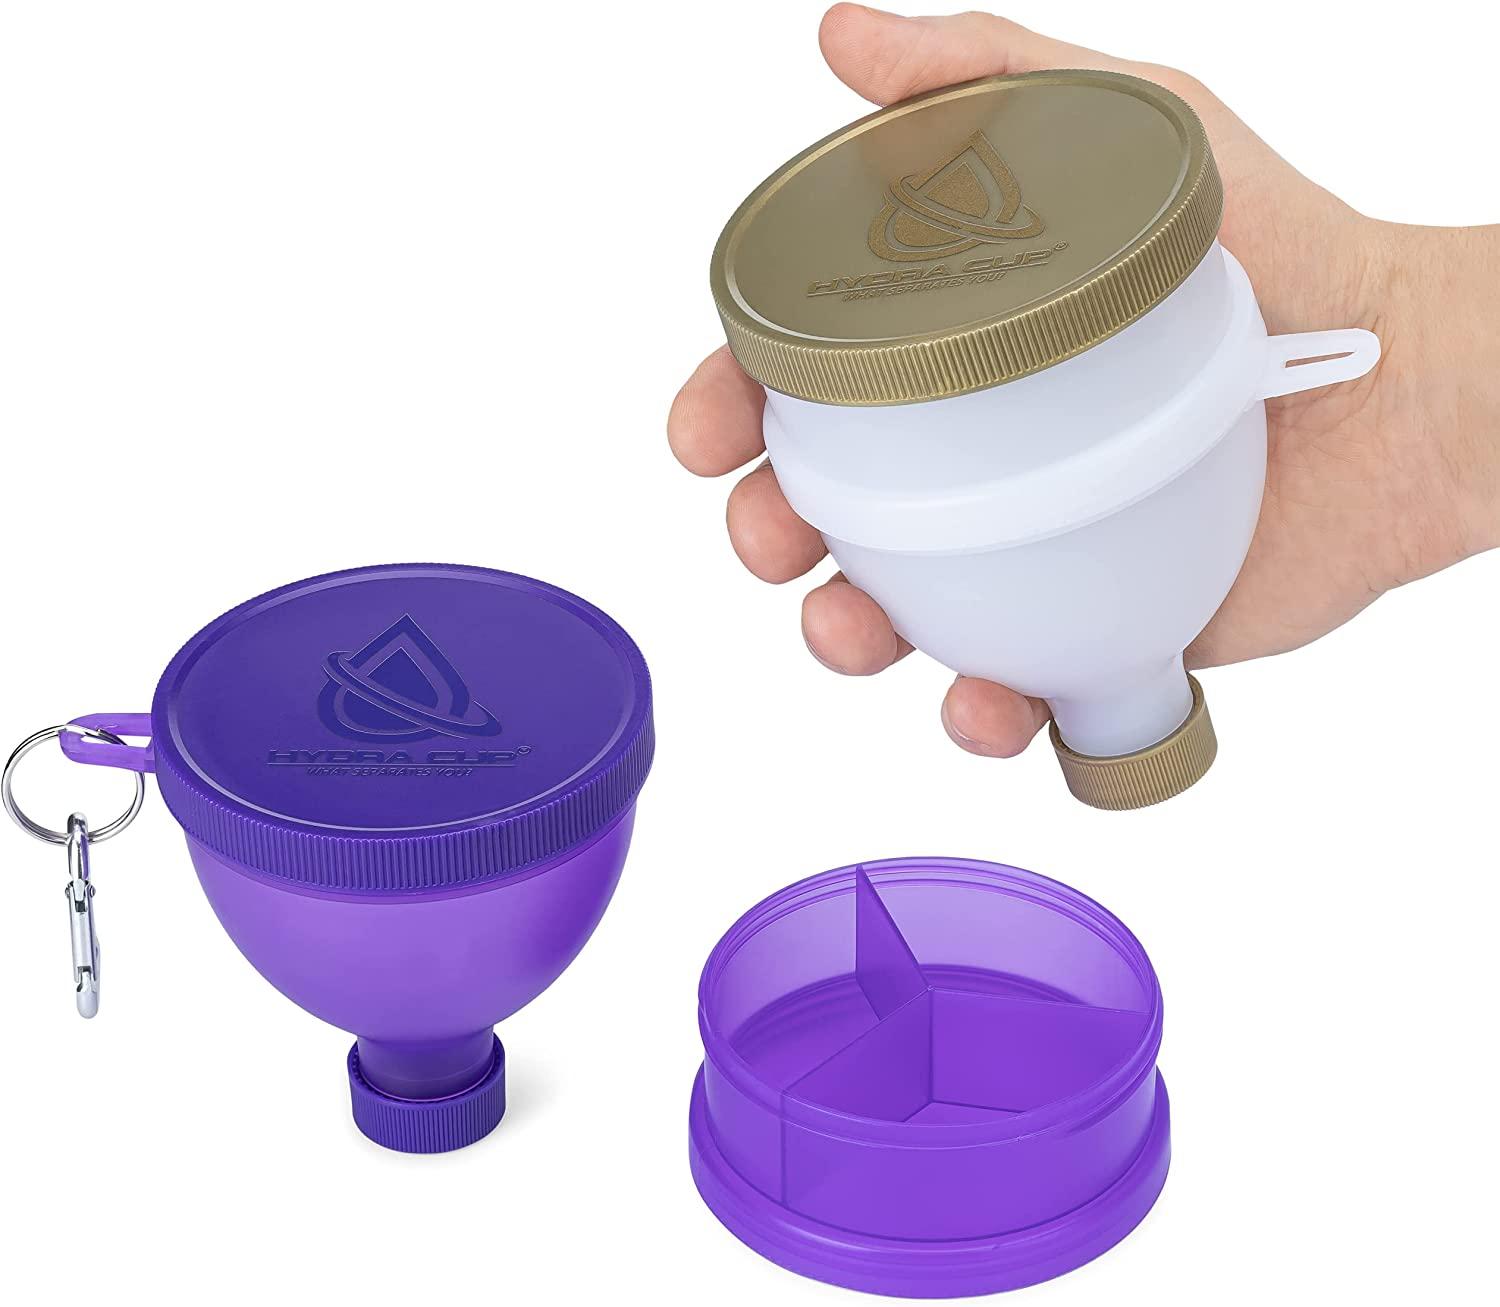 Hydra Cup ProStand [6 Pack] - Funnels w/Stand for Filling Water Bottles with Protein Powder, Supplement Container Set to Go or Kitchen Use, Keychain for